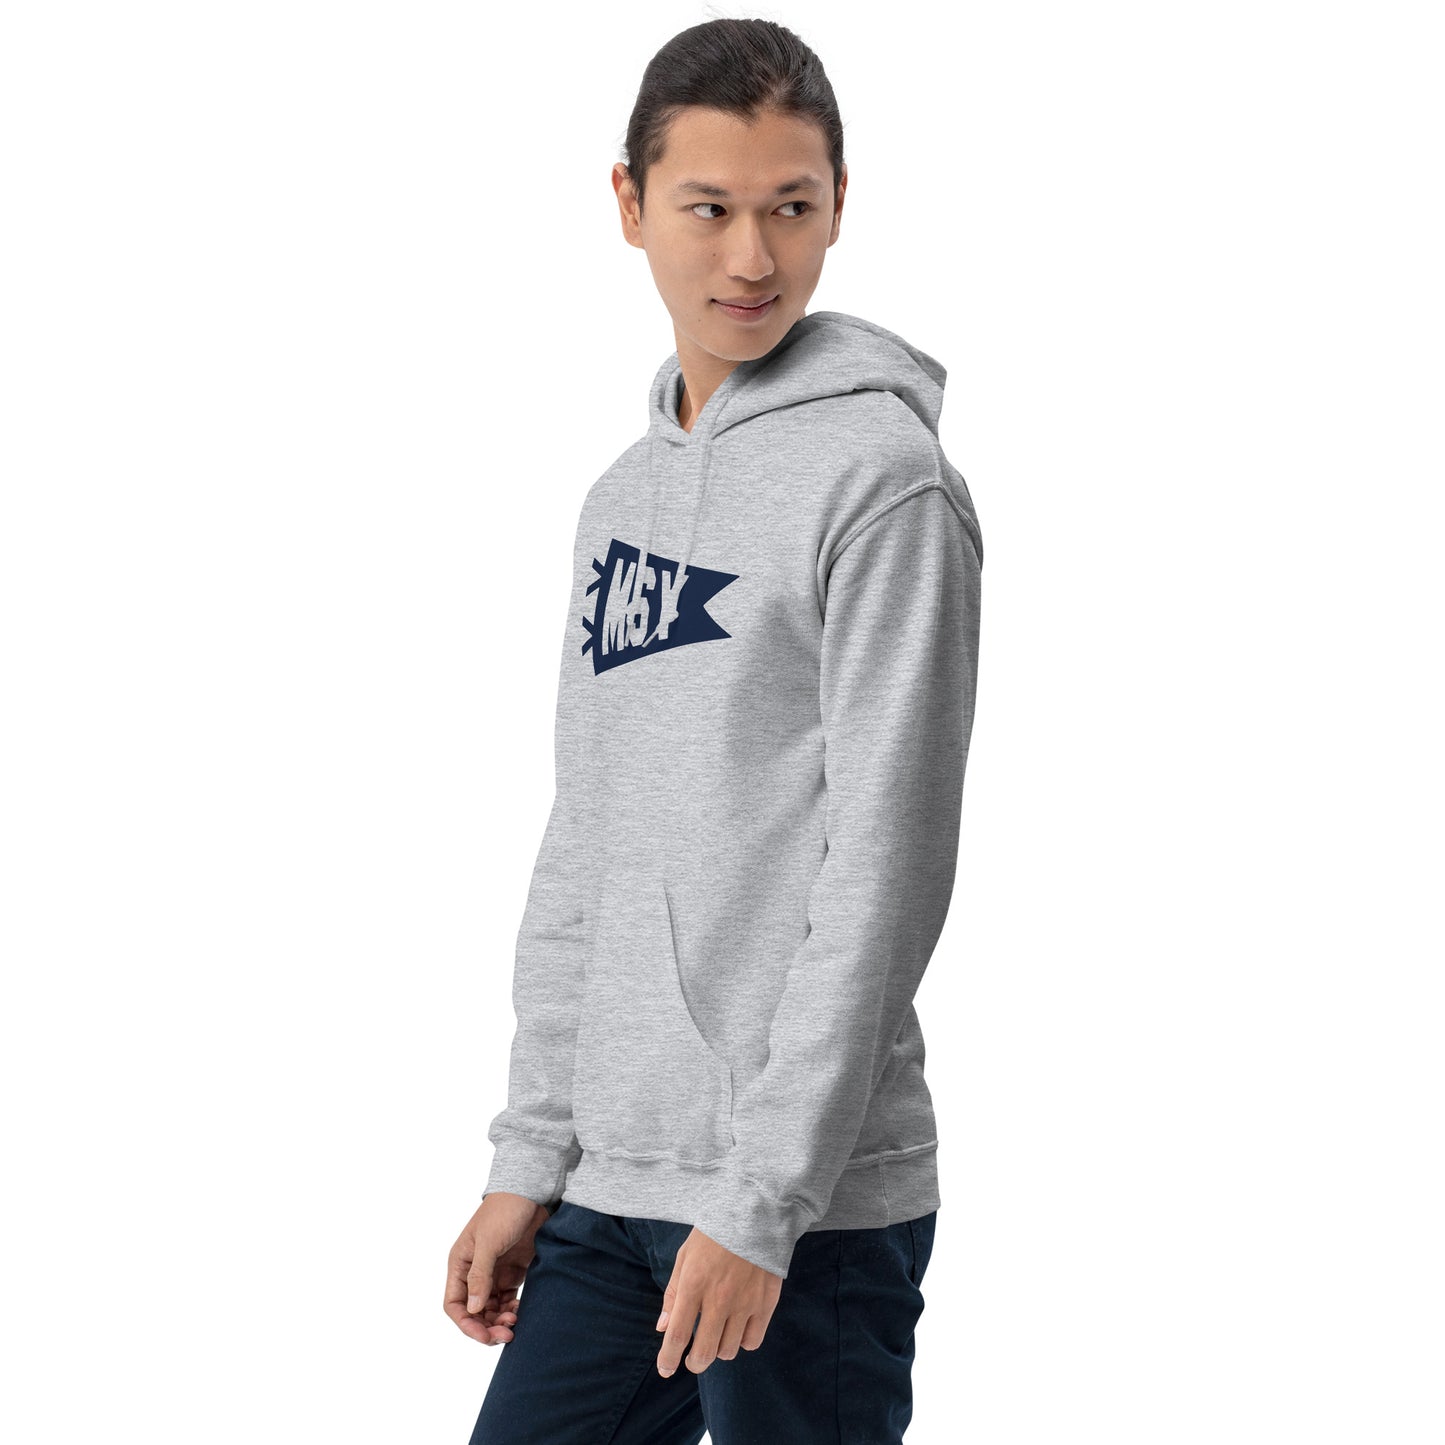 Airport Code Unisex Hoodie - Navy Blue Graphic • MSY New Orleans • YHM Designs - Image 10